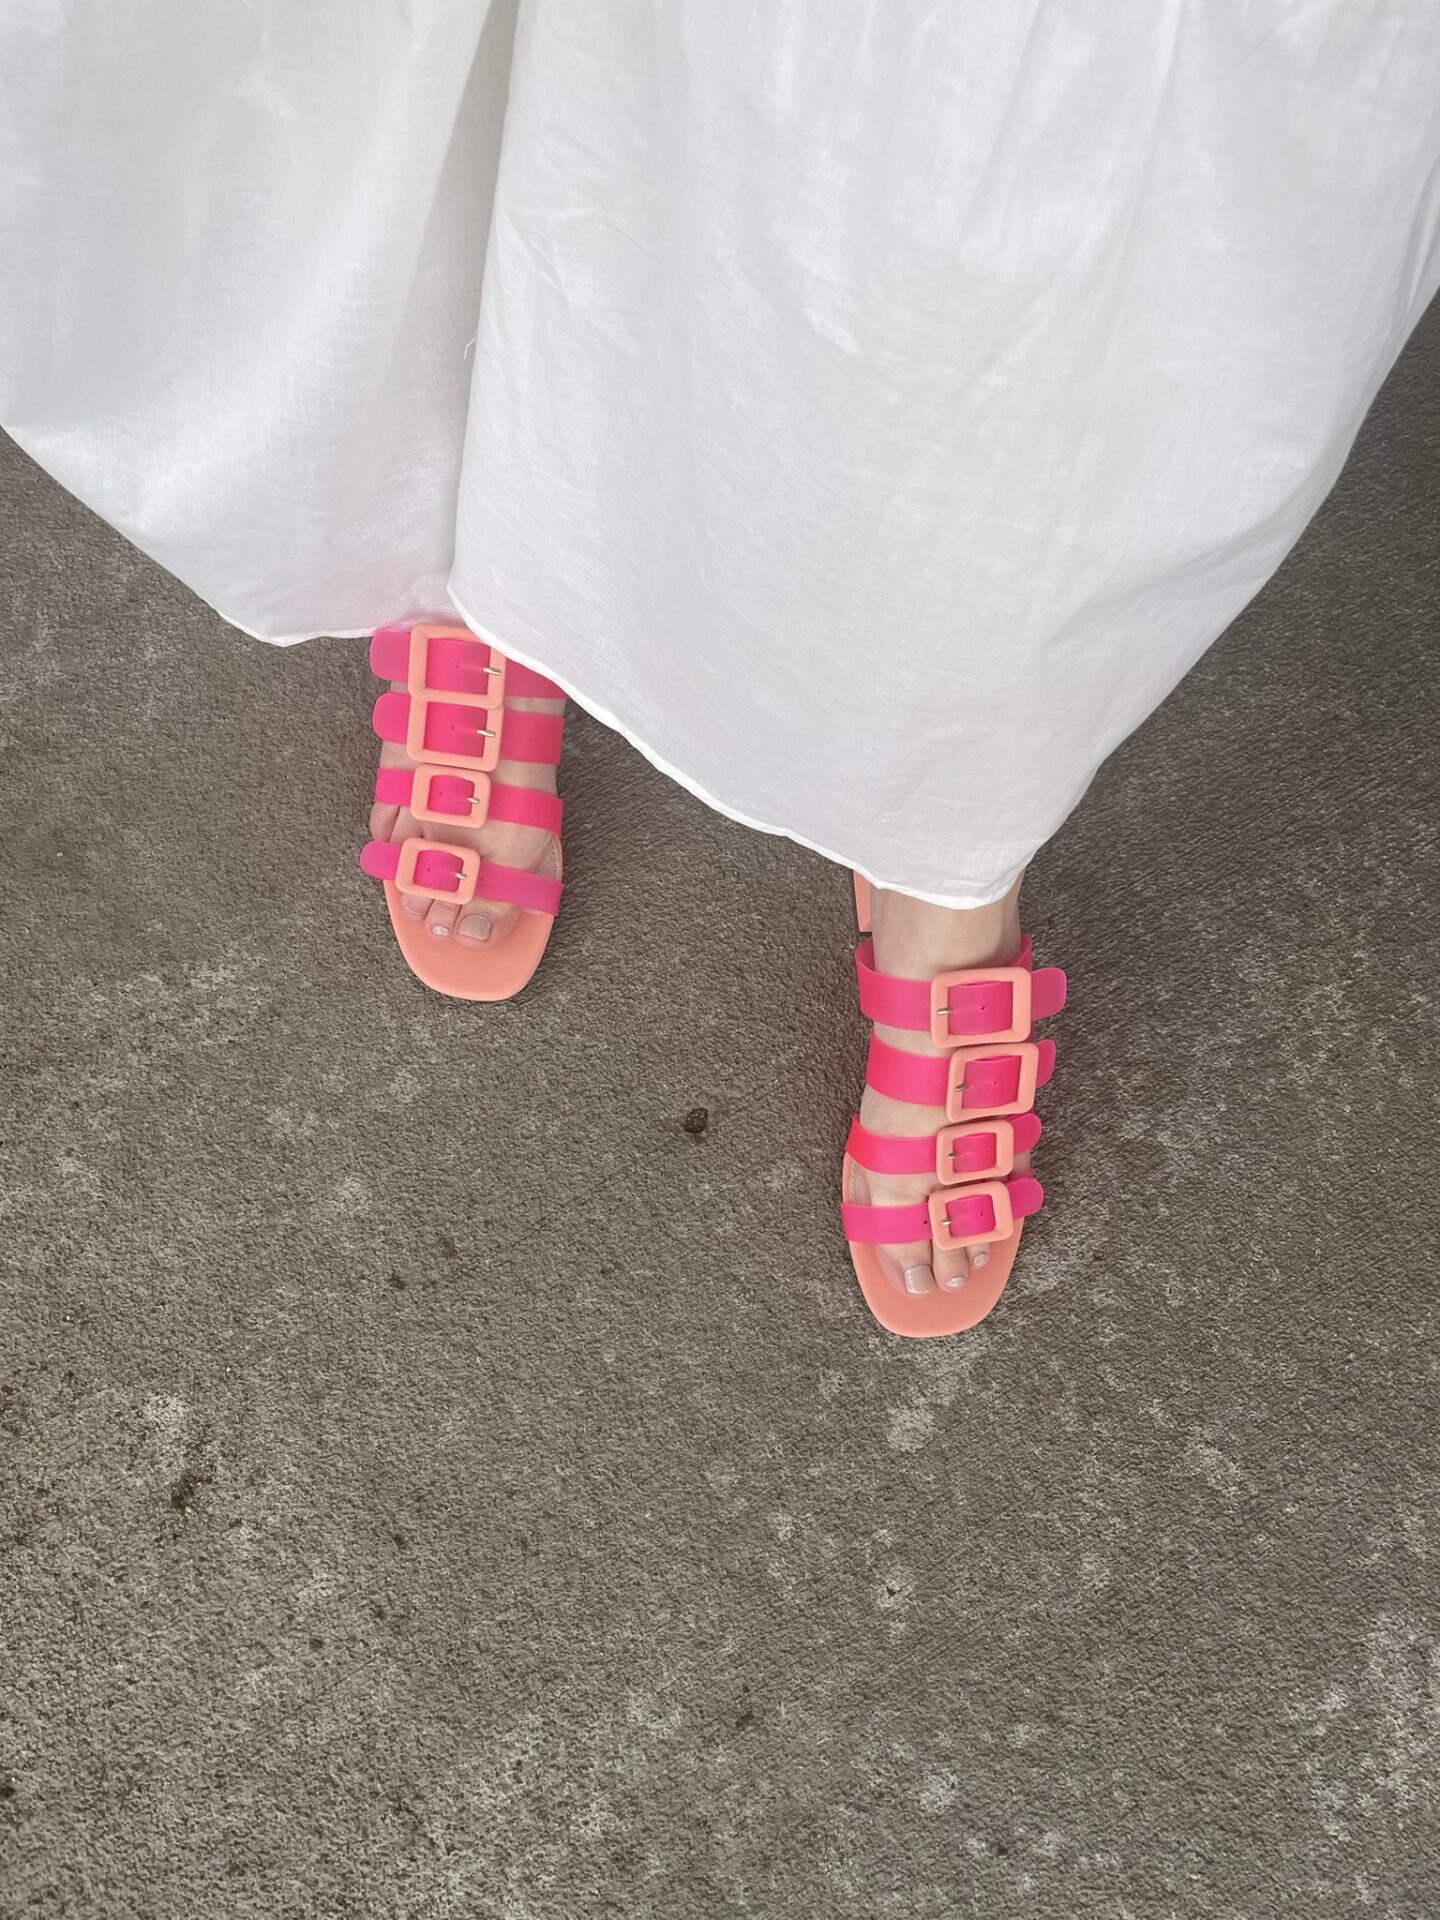 Karin Emily wears a pair of pink jelly sandals